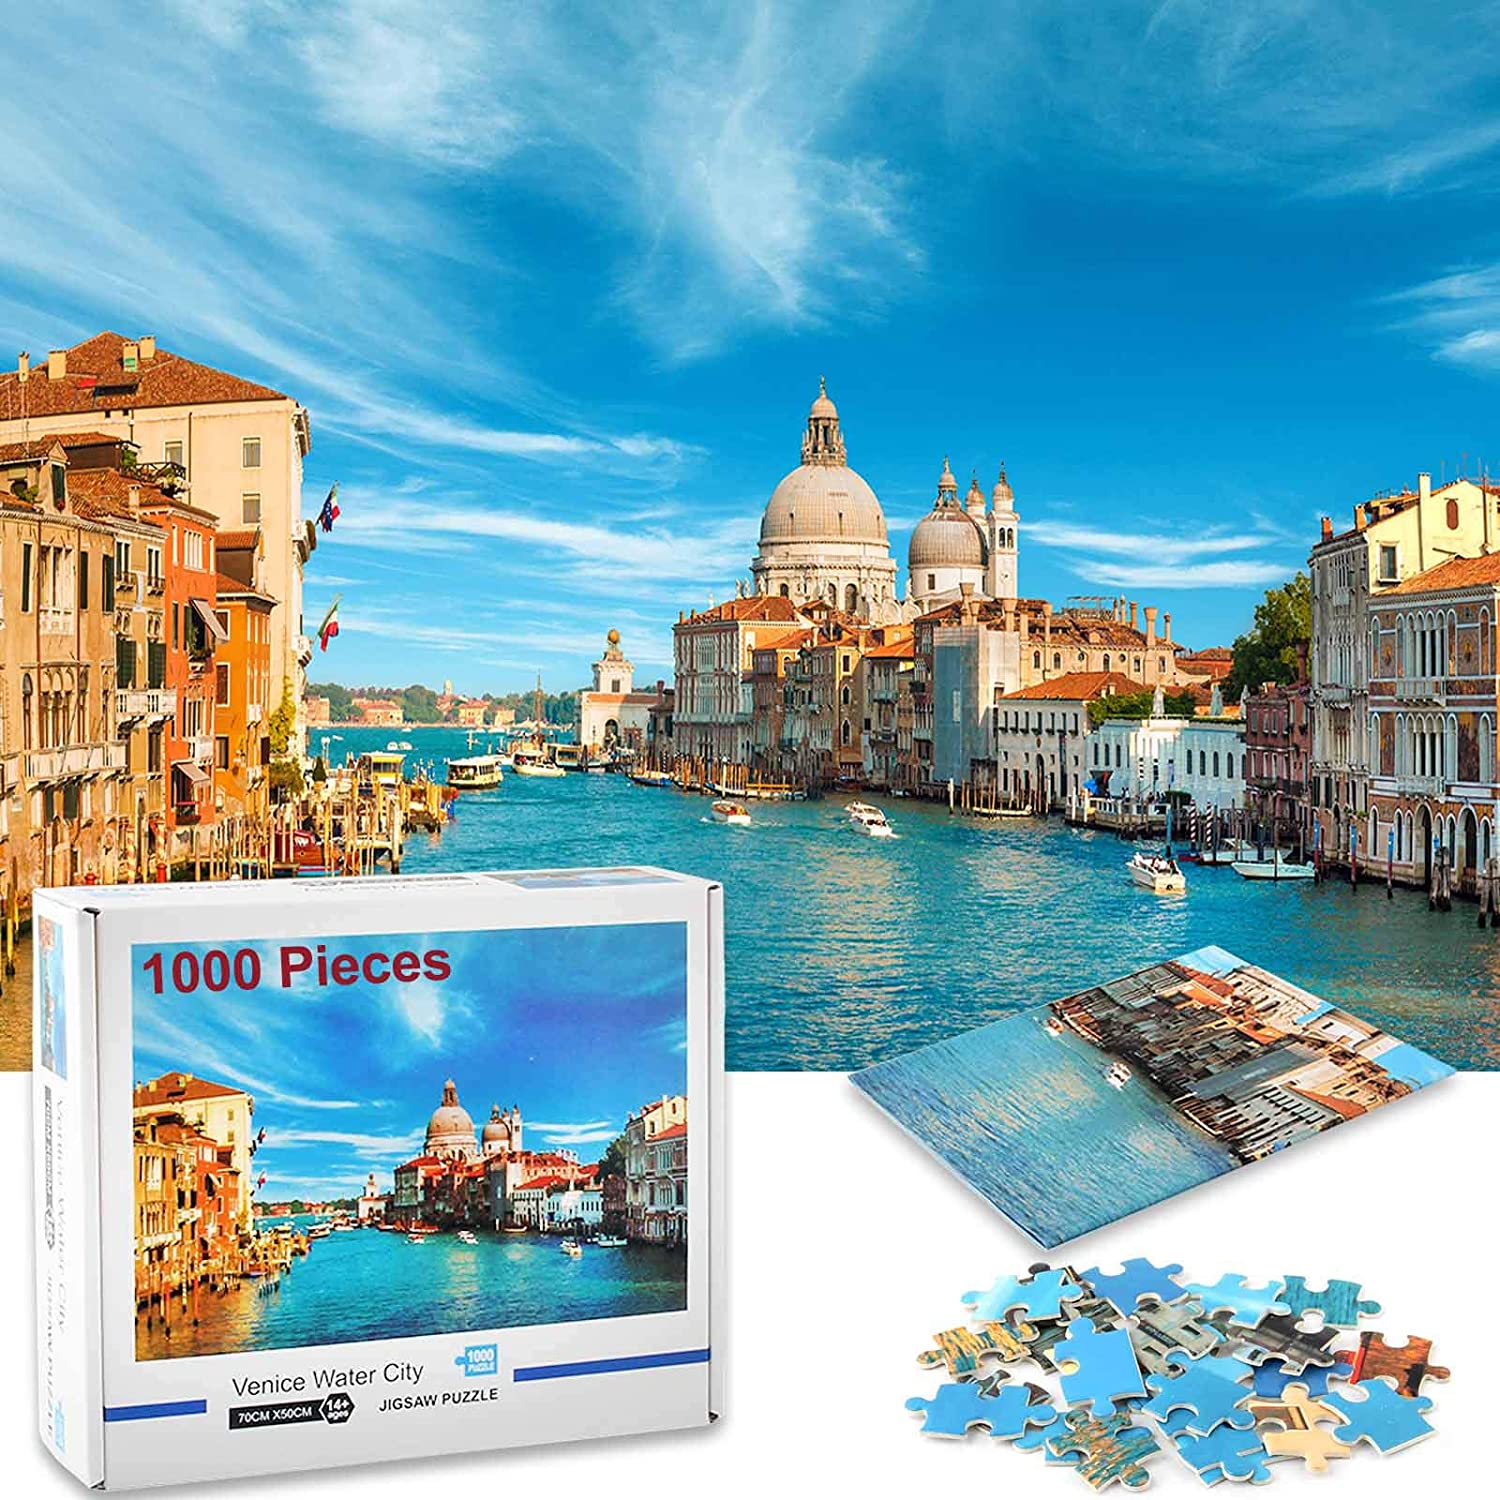 1000 Pieces New Venice Jigsaw Puzzles Assembling For Education Games Adults Kids 